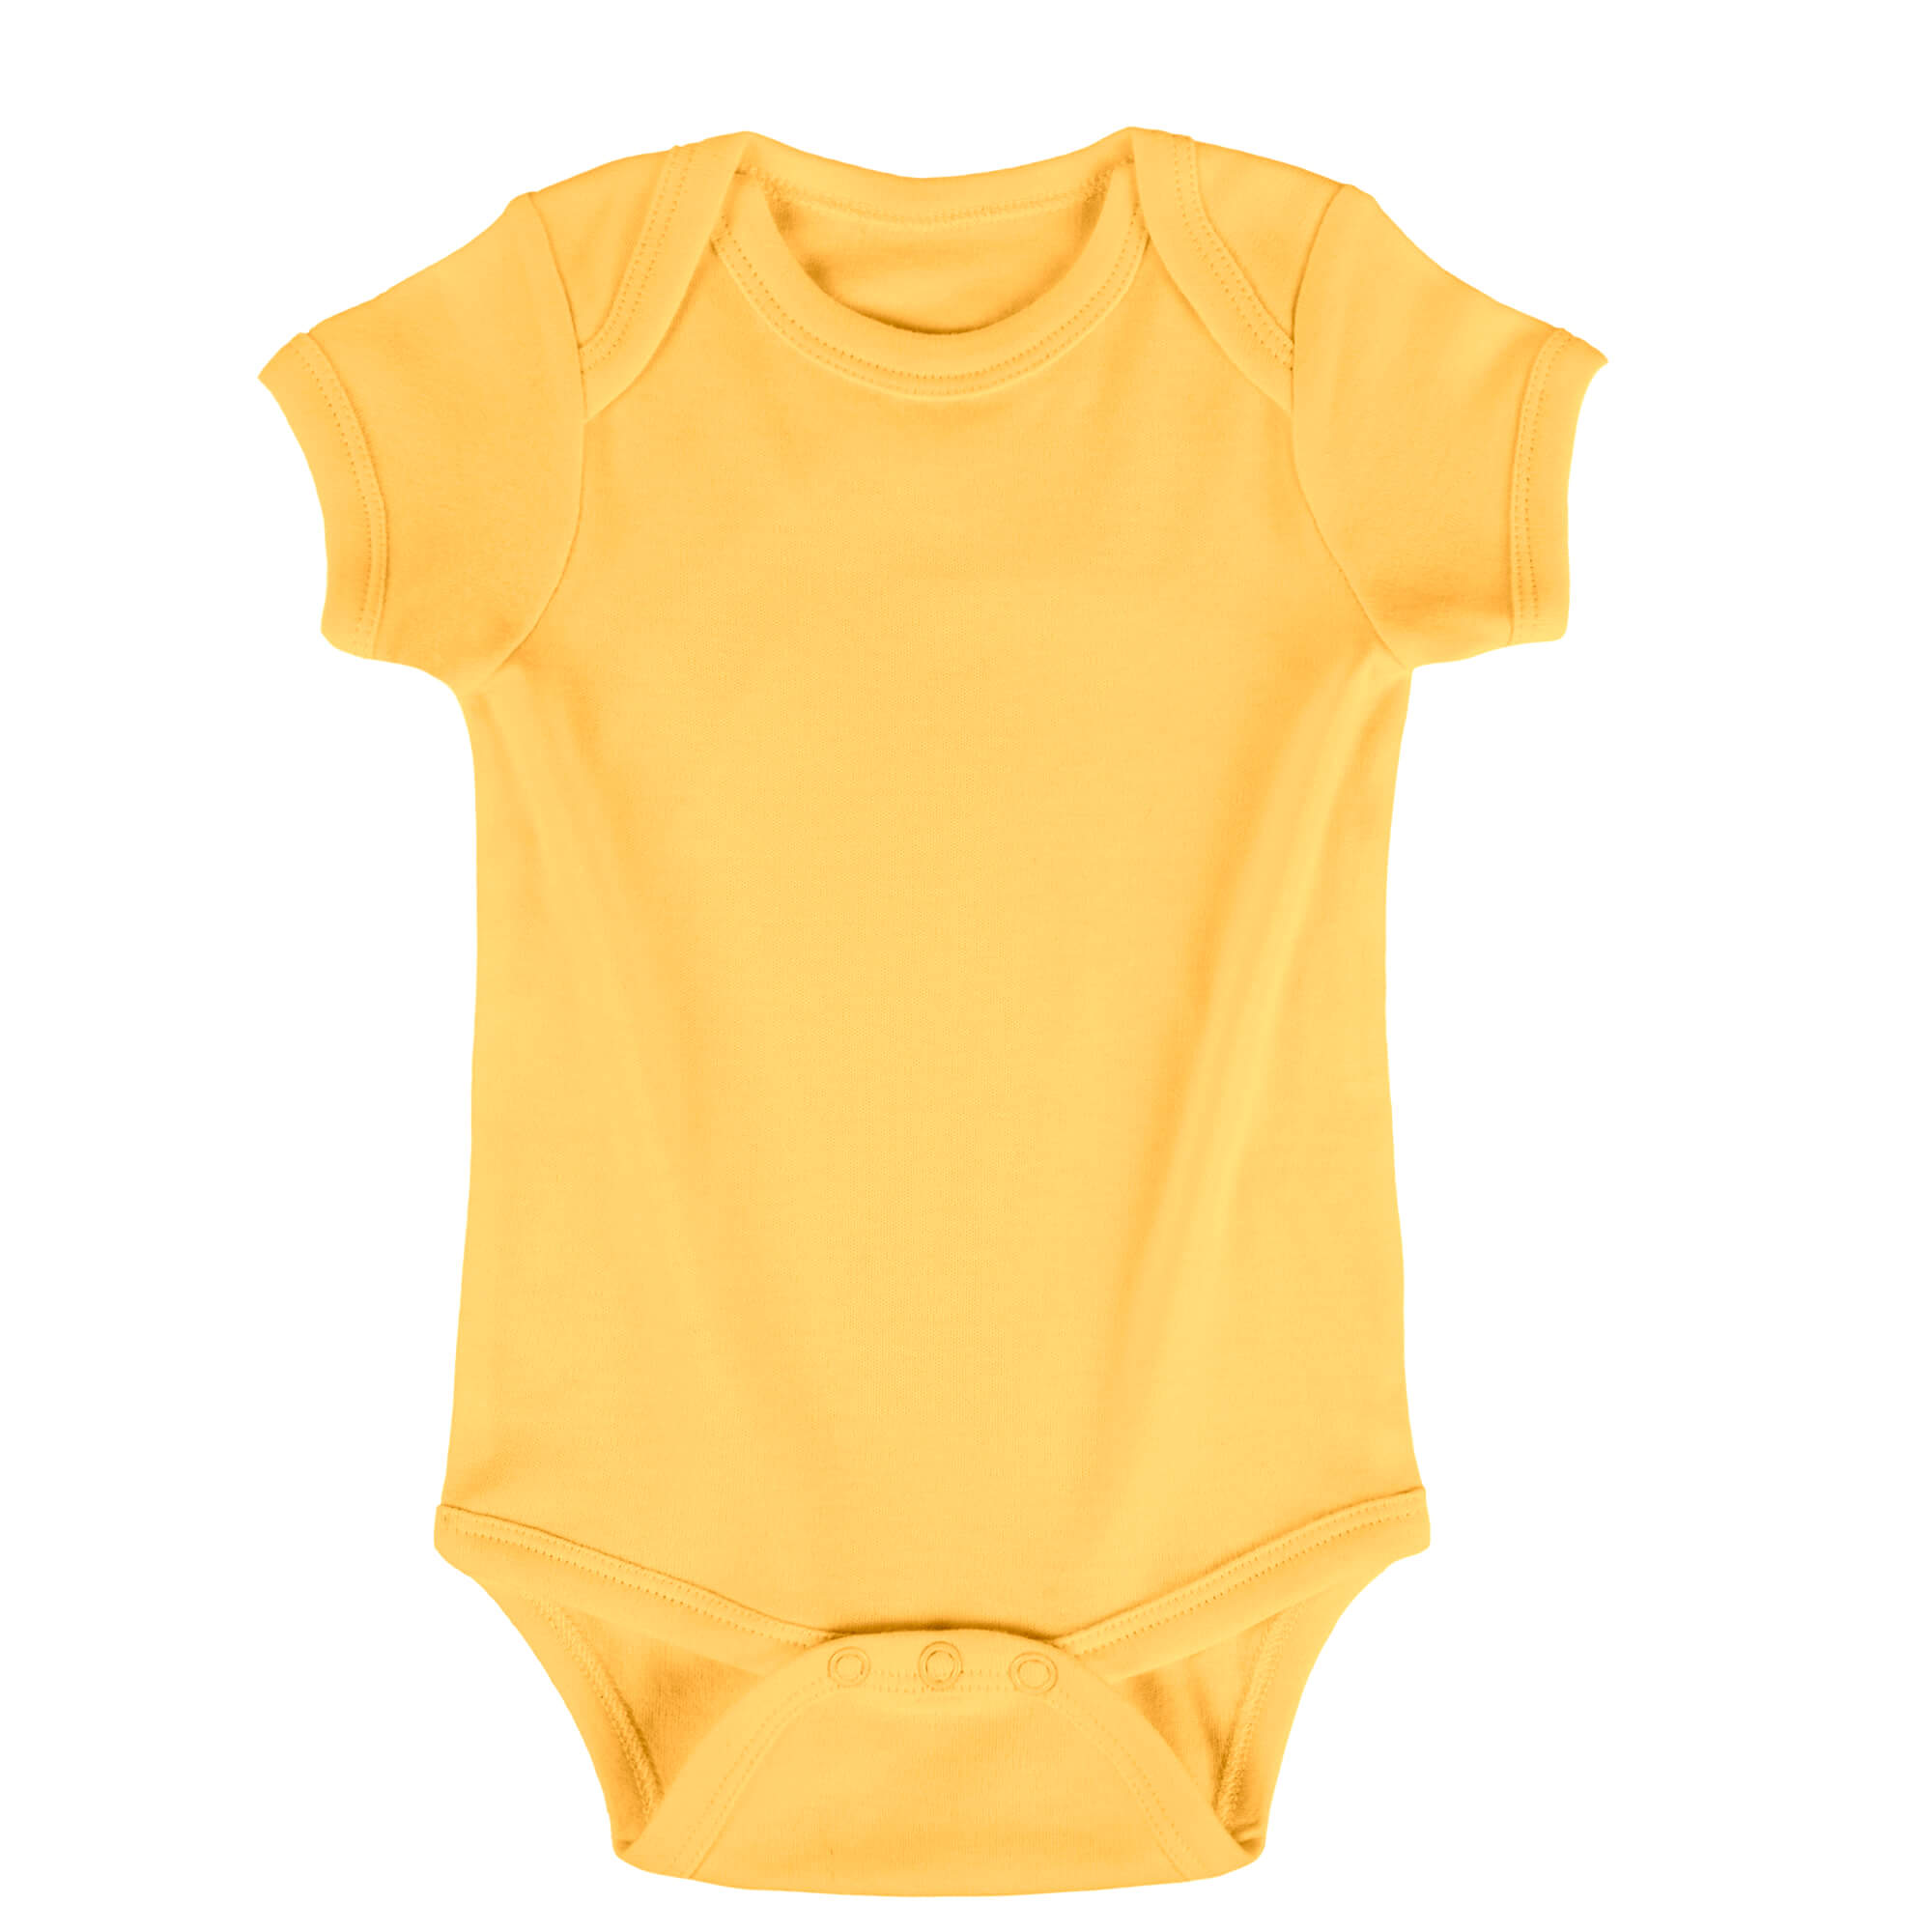 yellow color number #12, onesie color selection, and color display.